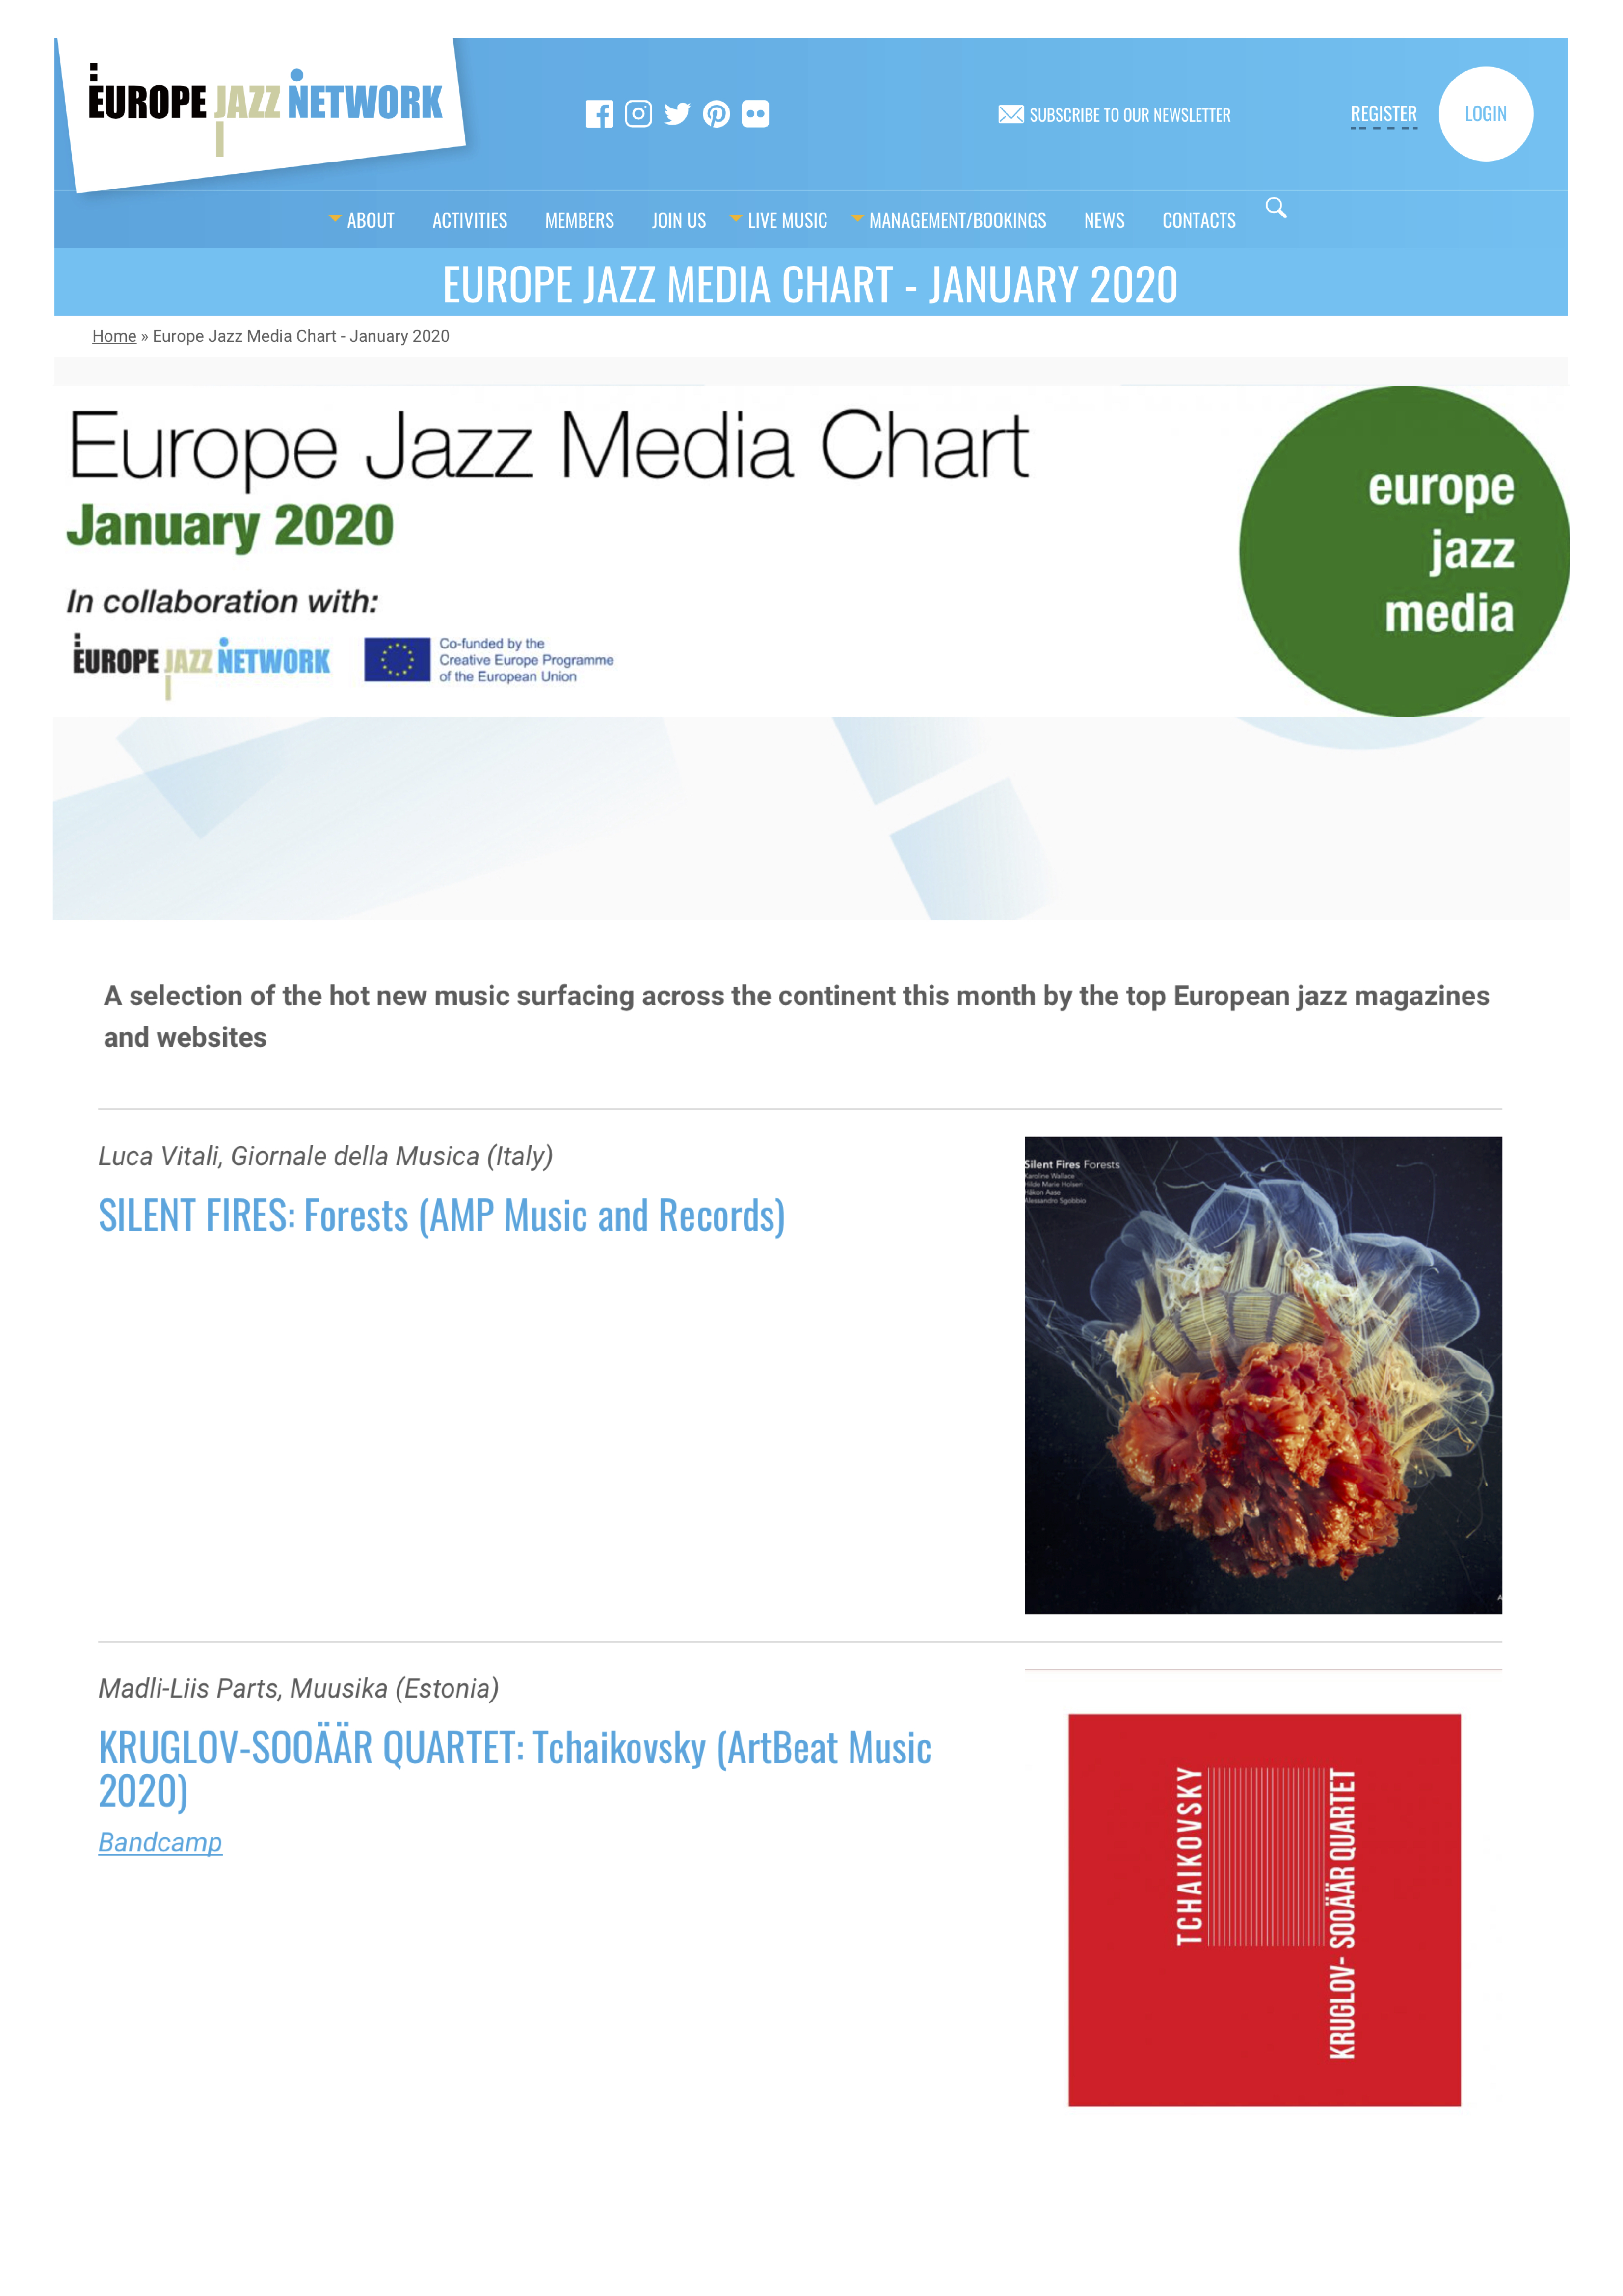 Forests - Europe Jazz Media Chart (02.01.20)